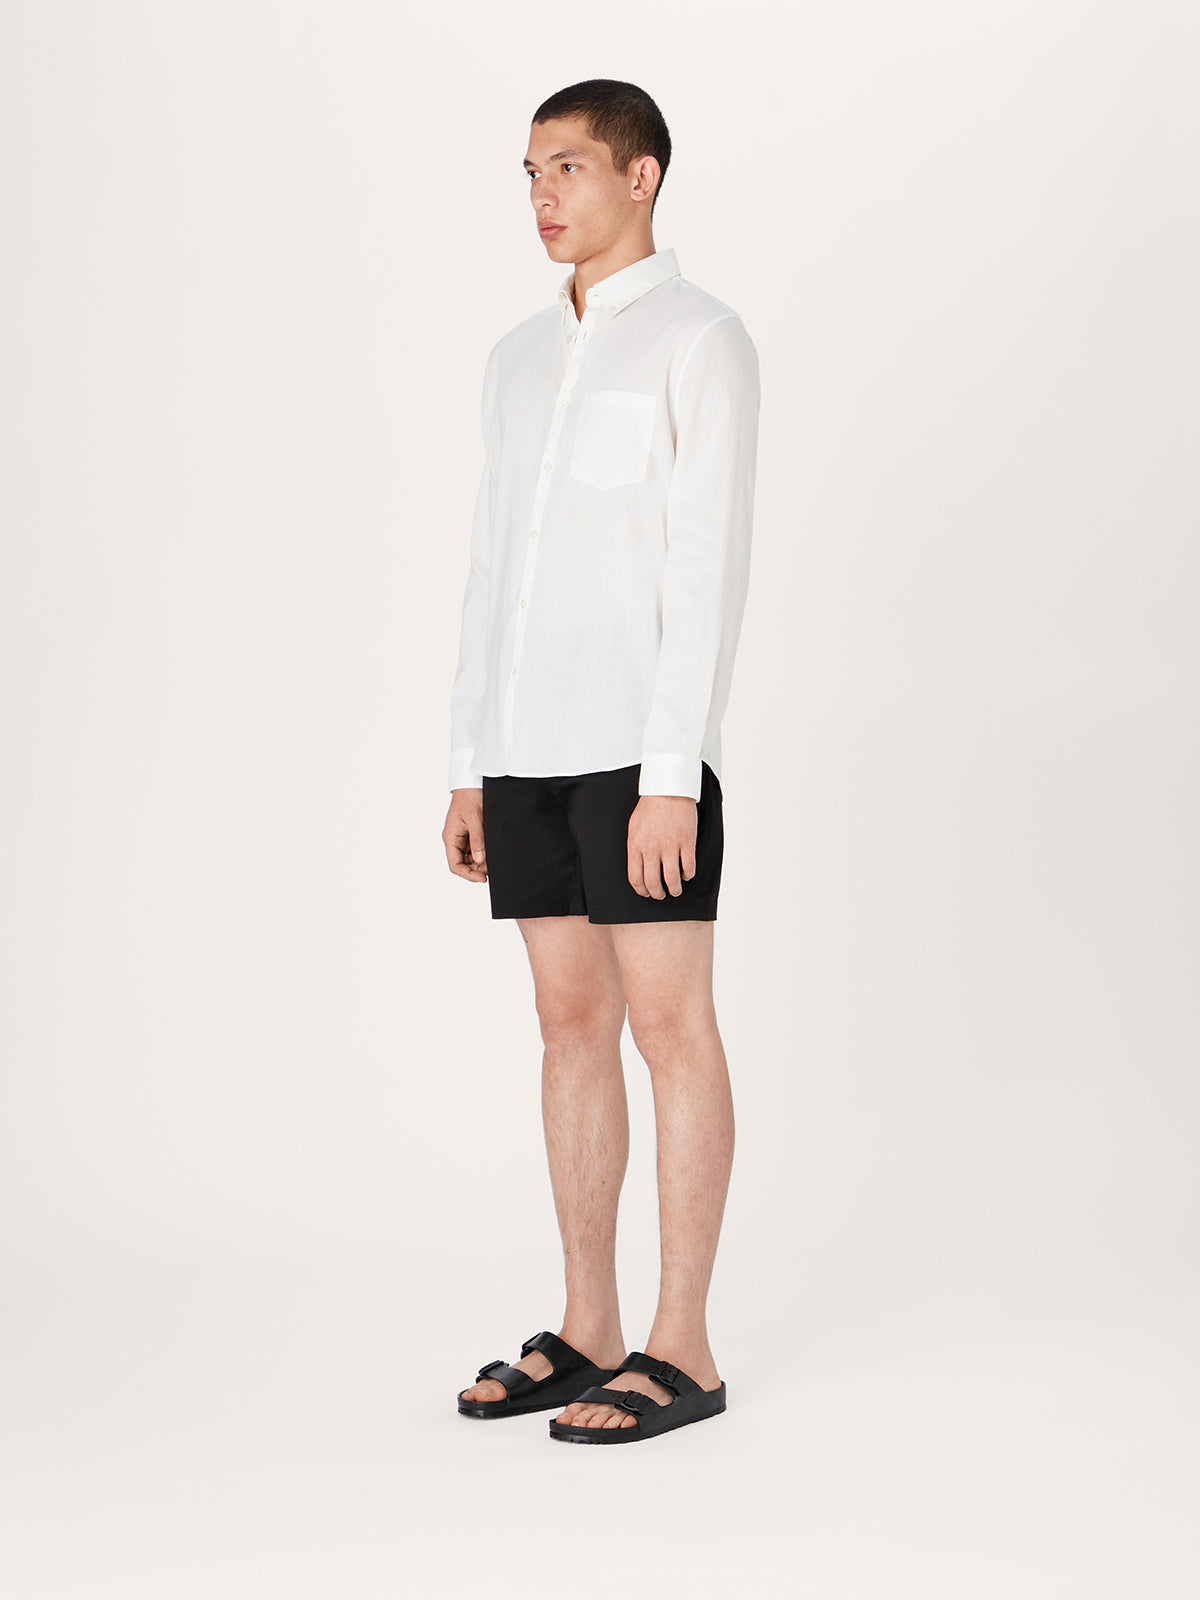 The All Day Shirt Linen Collared || Off White | Linen